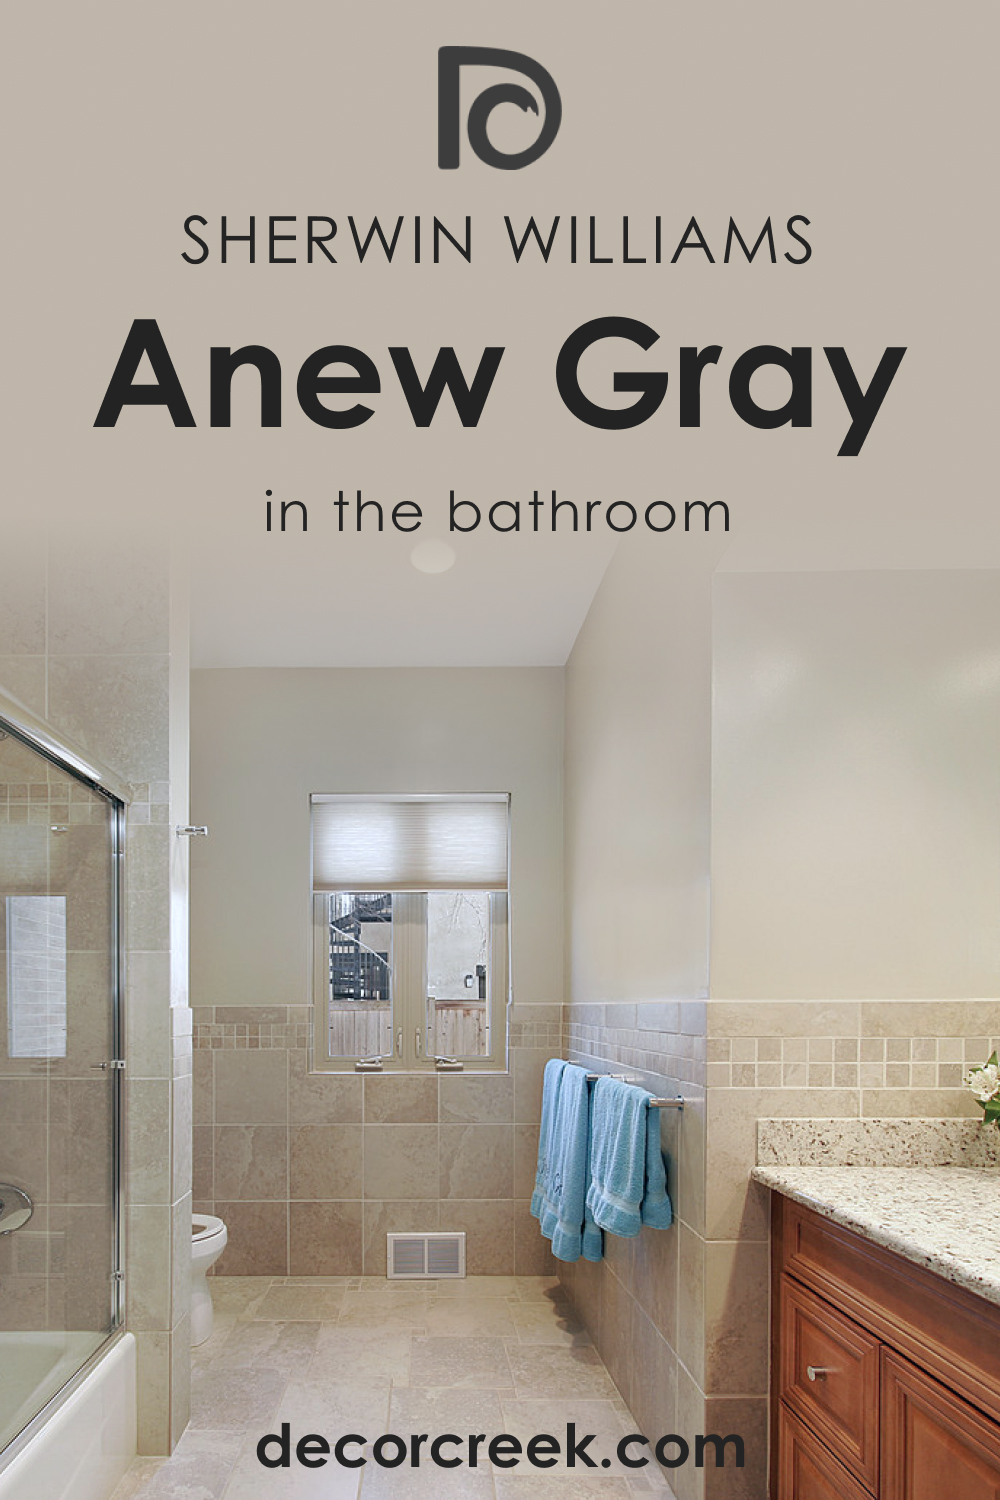 How to Use SW 7030 Anew Gray in the Bathroom?